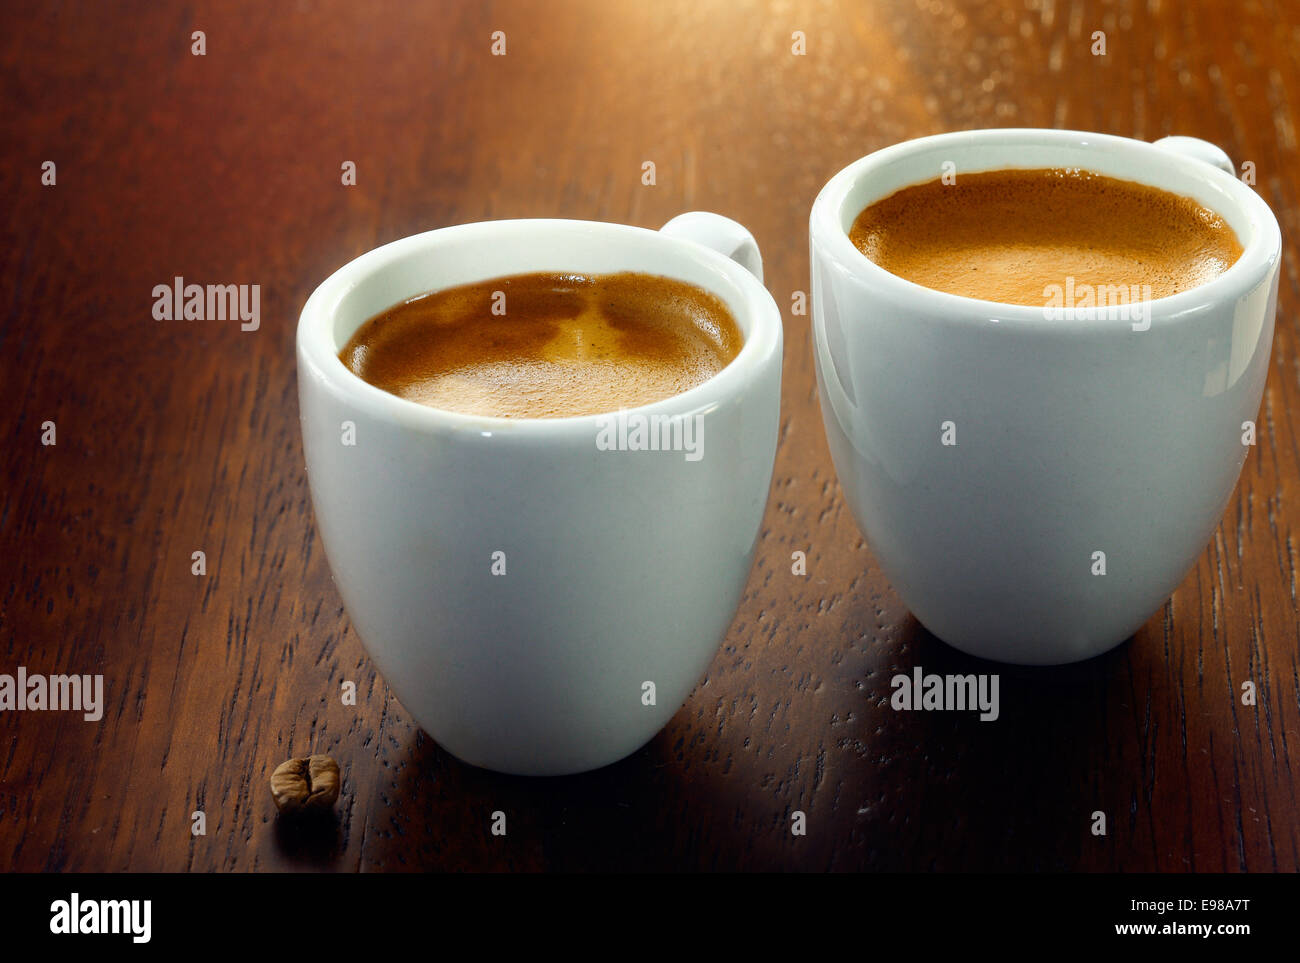 Two espresso coffees in small white cups,with a single coffee bean resting on the wood background Stock Photo